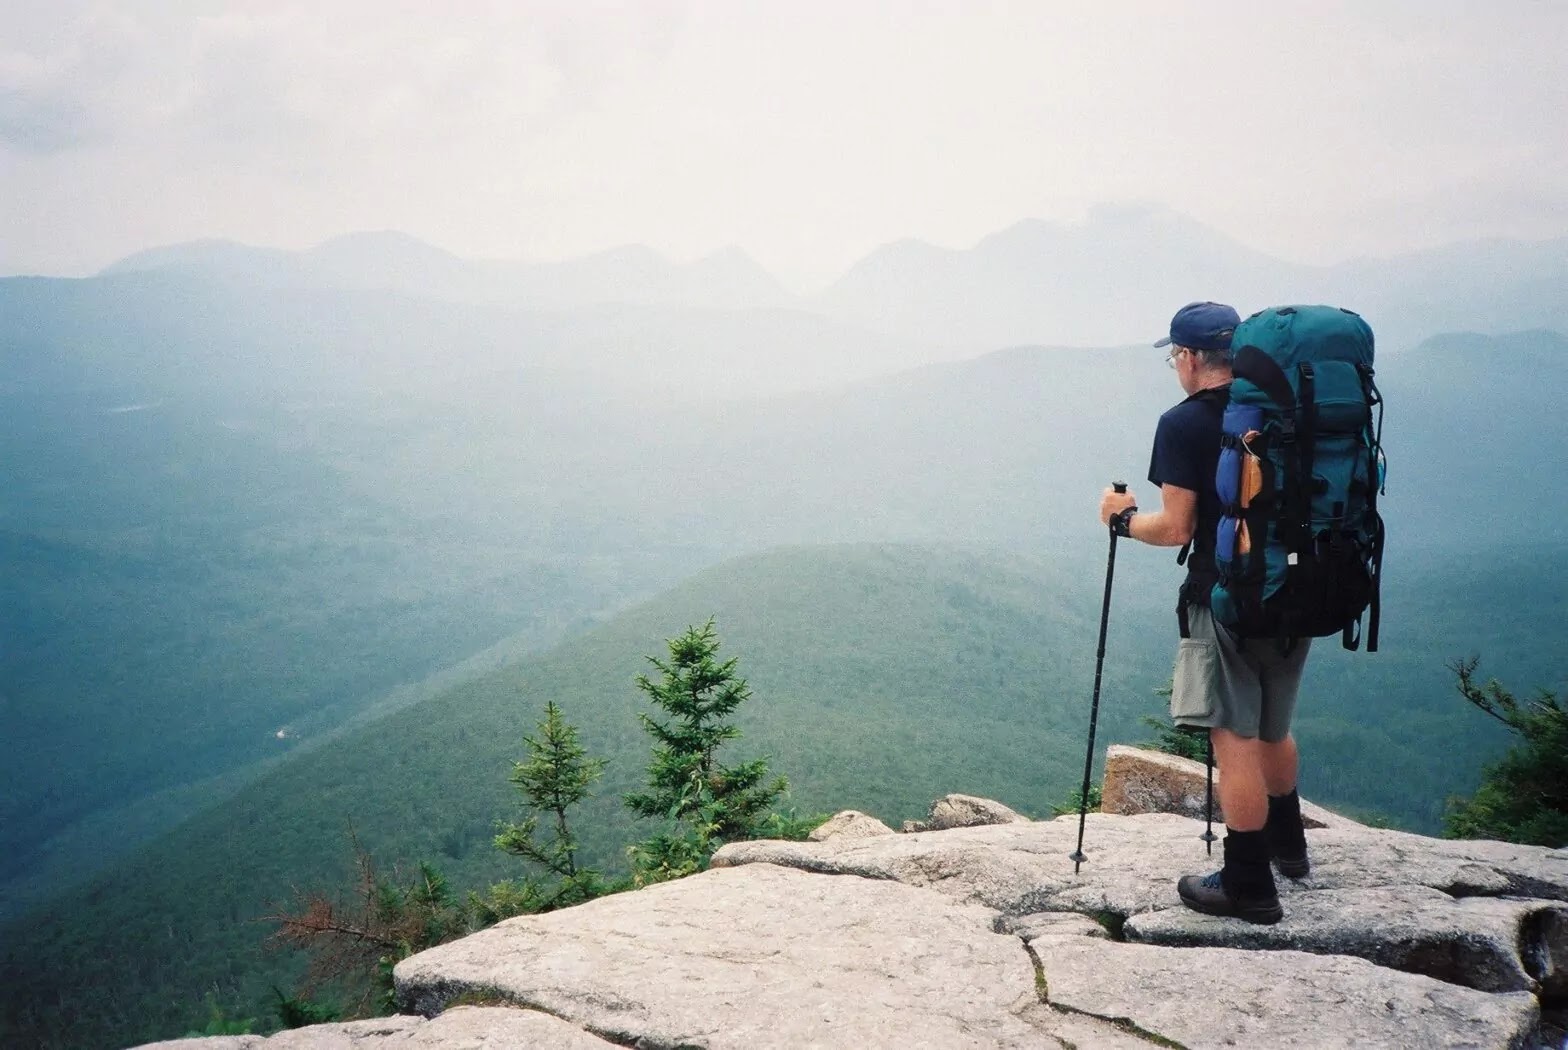 Exploring the Appalachian Trail The Worlds Longest Hiking-Only Footpath